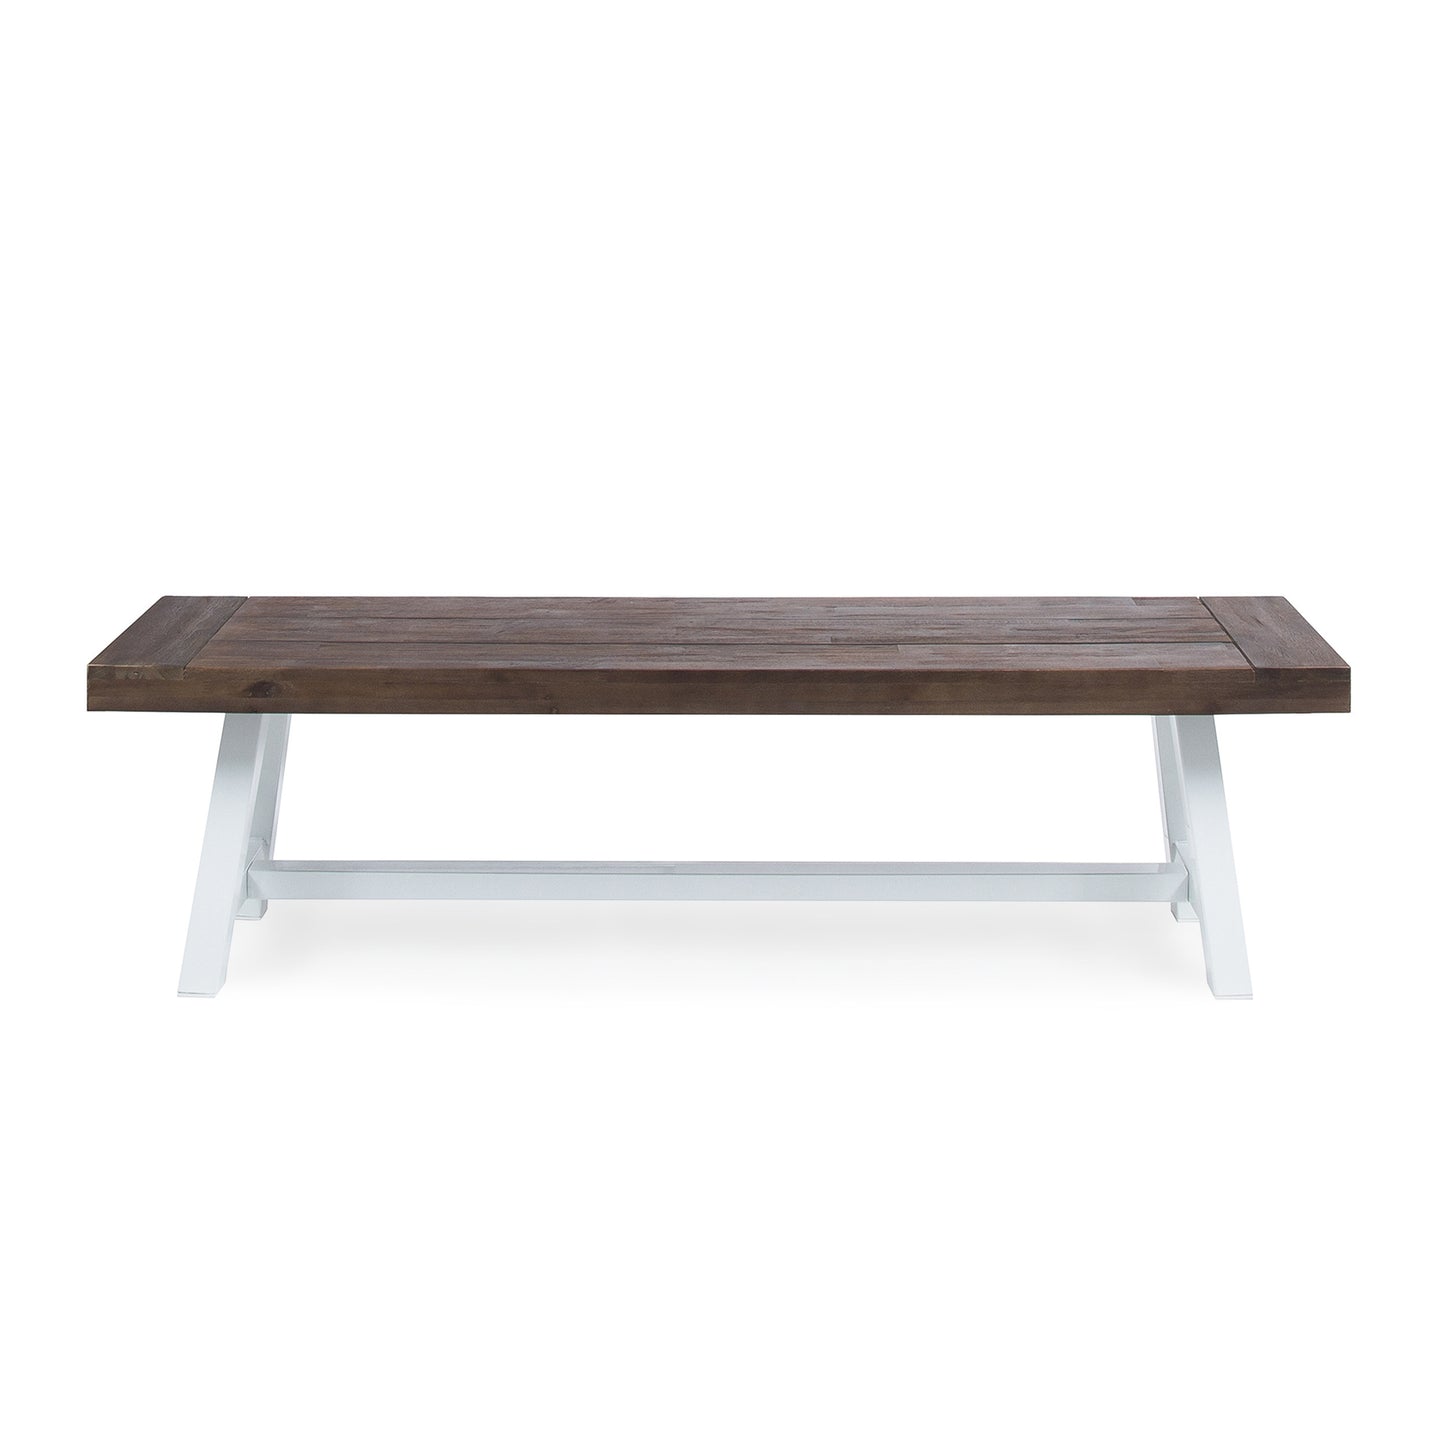 Bowman Outdoor Acacia Wood Dining Bench with Rustic Metal Finish Frame